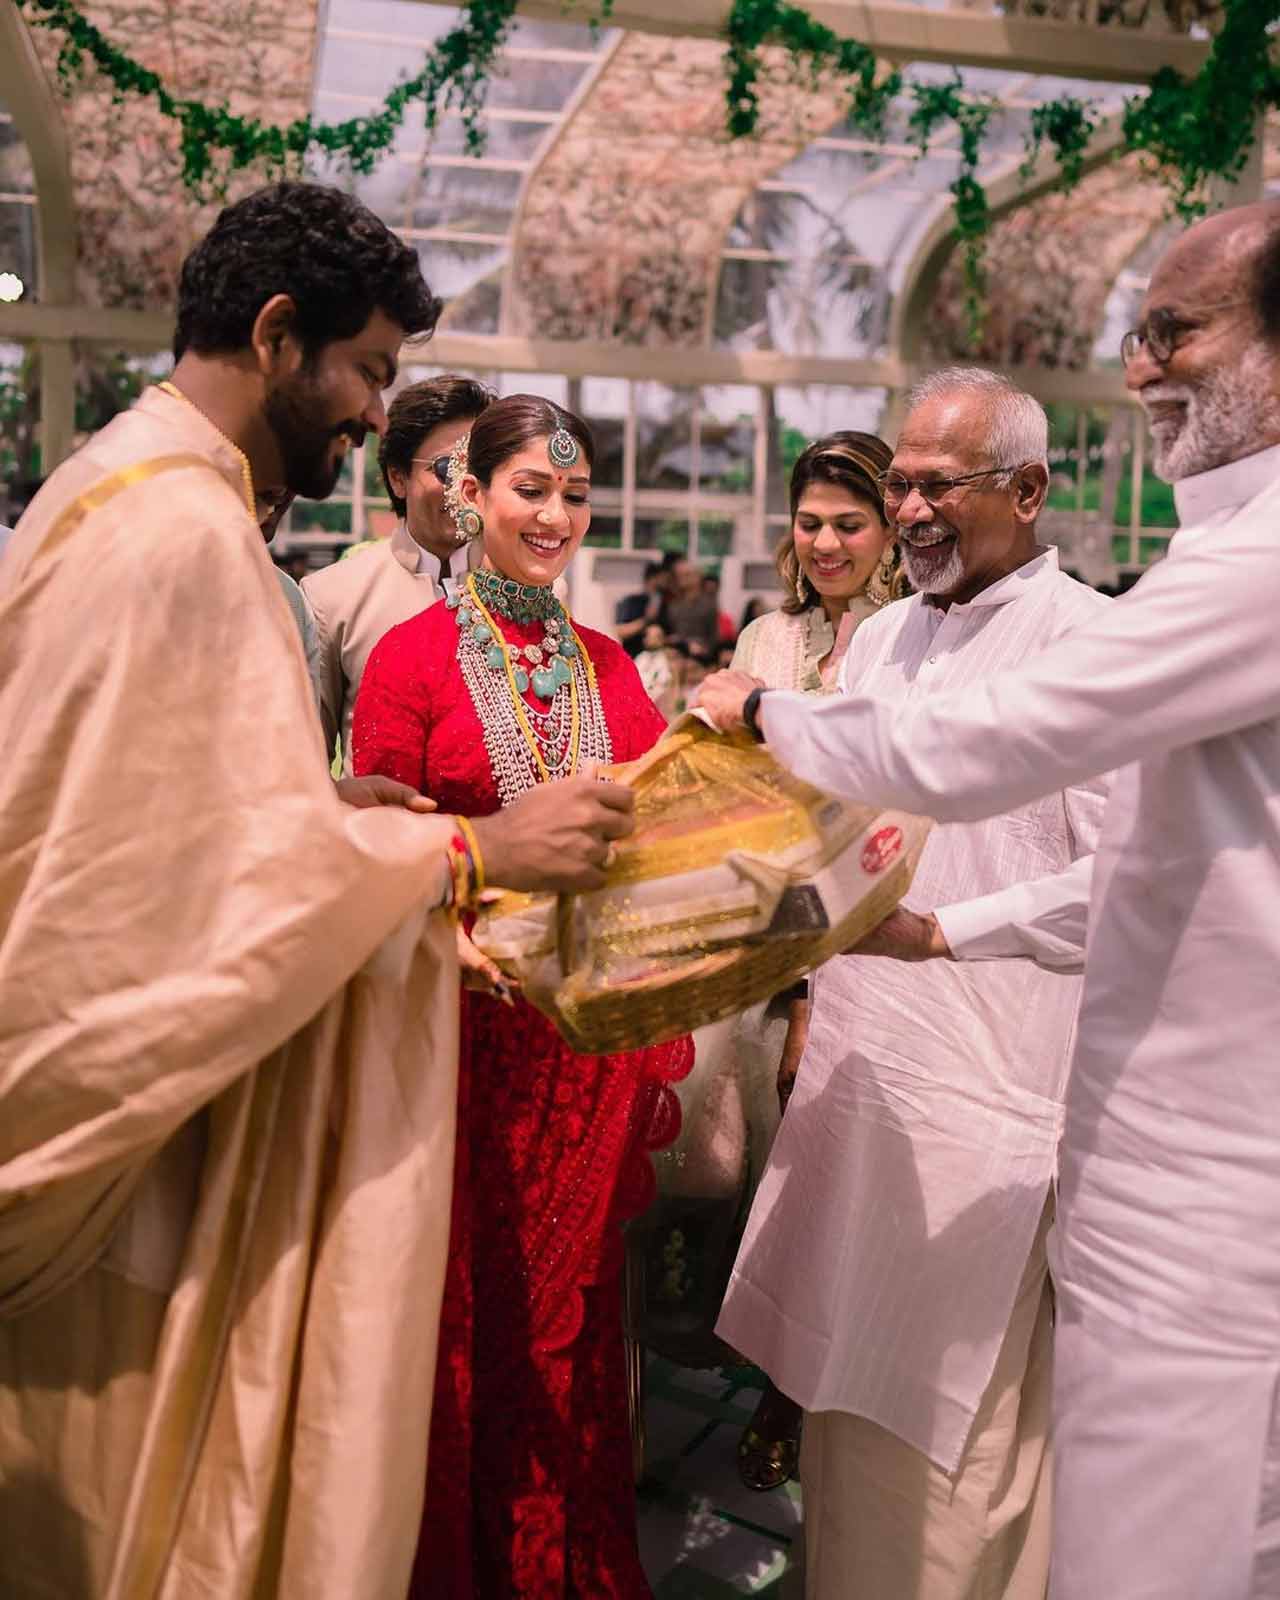 Vignesh and Nayanthara's wedding was attended by several celebrities from the Indian film industry. Superstar Rajinikantha also graced the wedding and blessed the newly weds. 